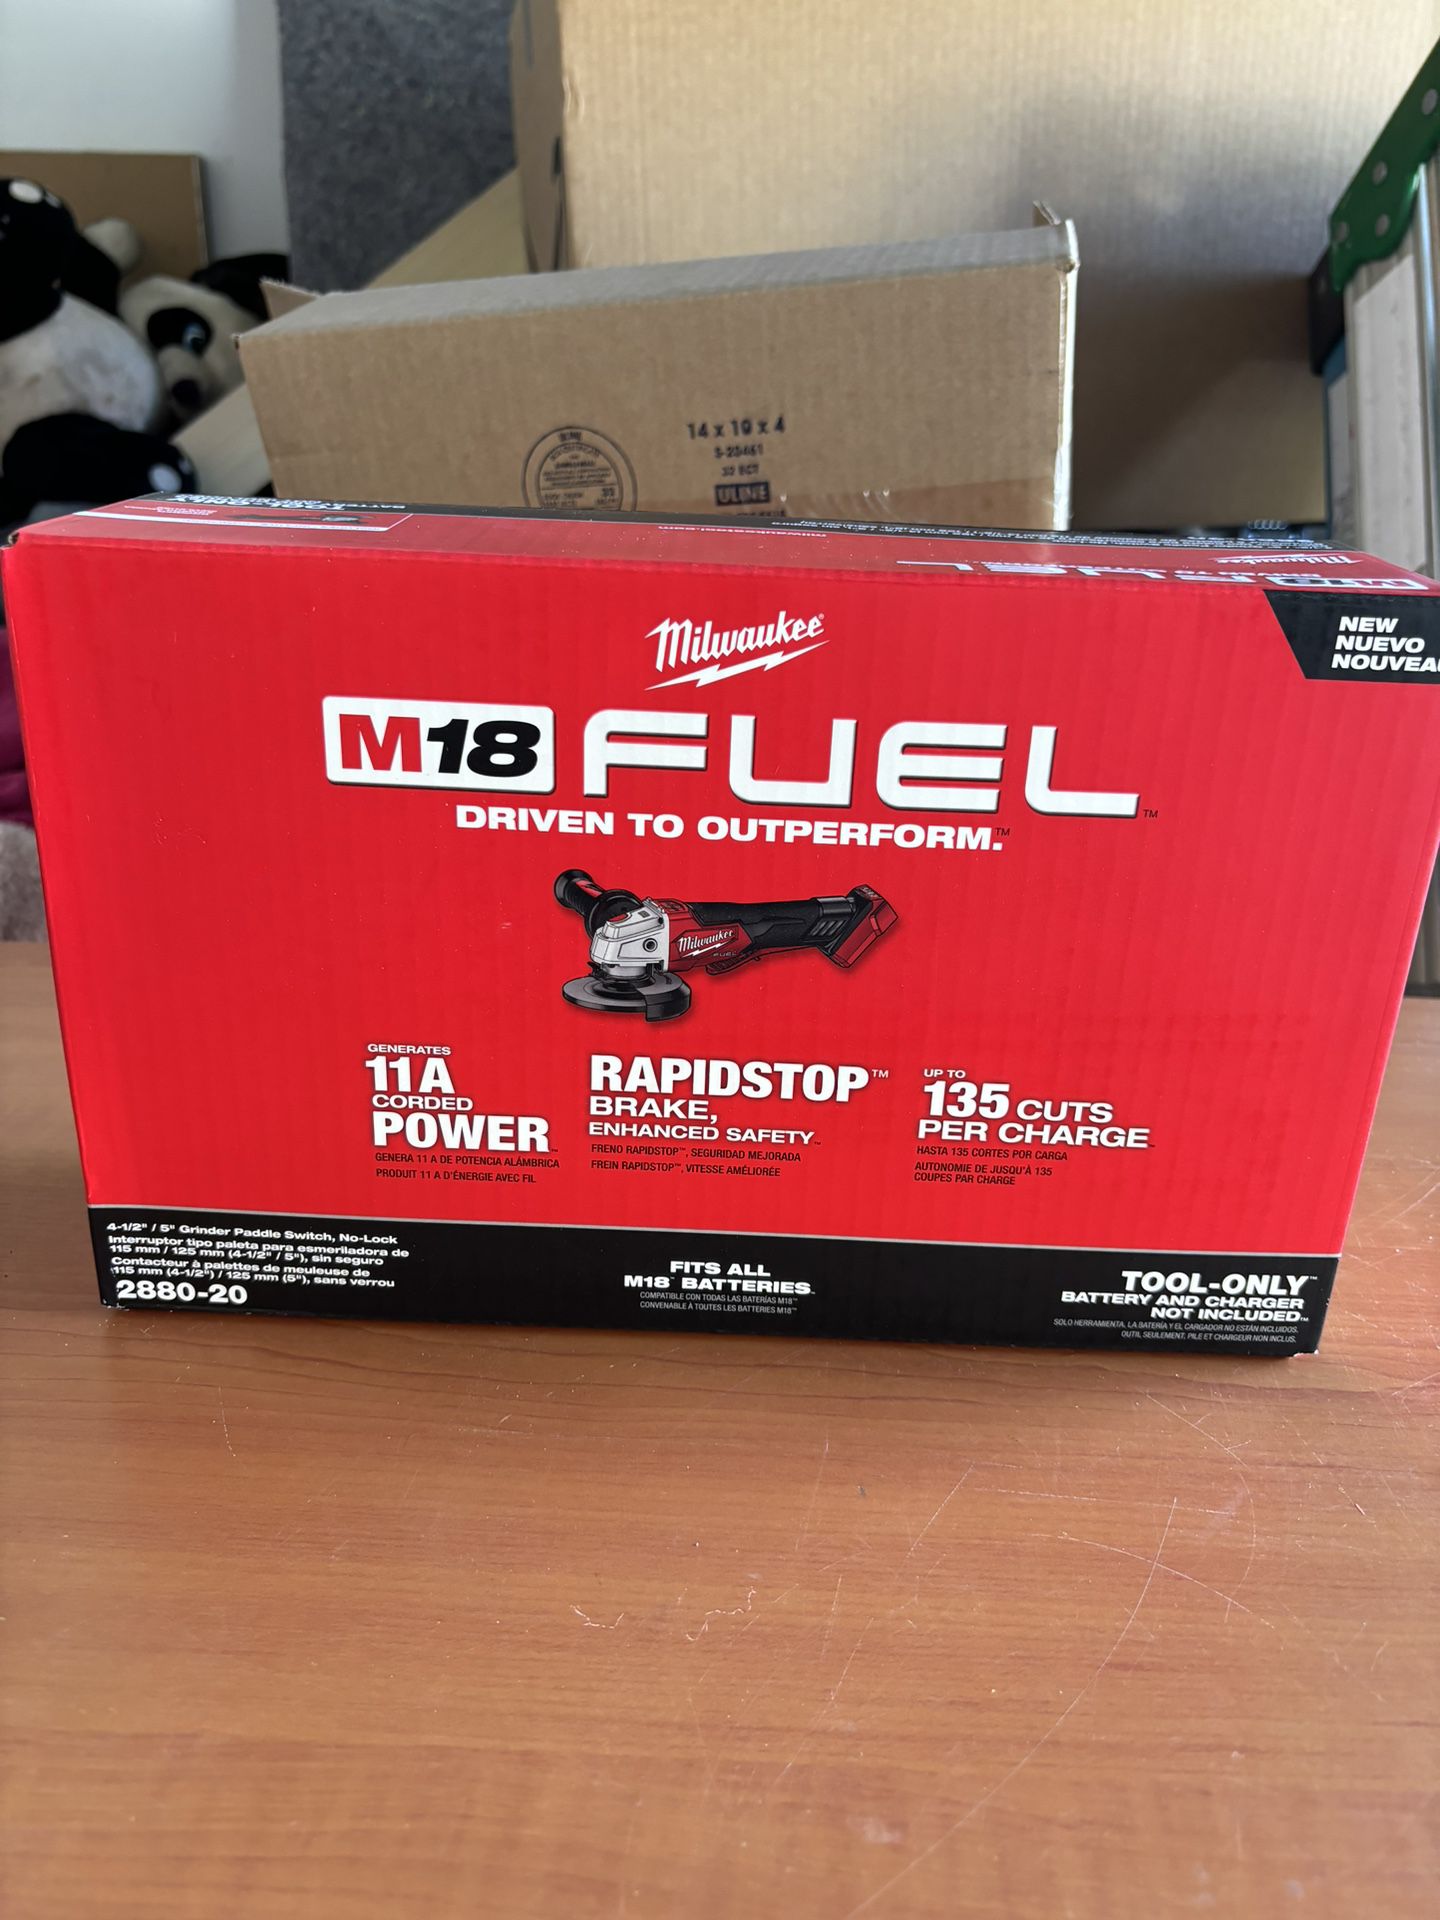 MILWAUKEE  FUEL M18  4-1/2-5 GRINDER PADDLE SWITCH. ( No Battery No Charger )